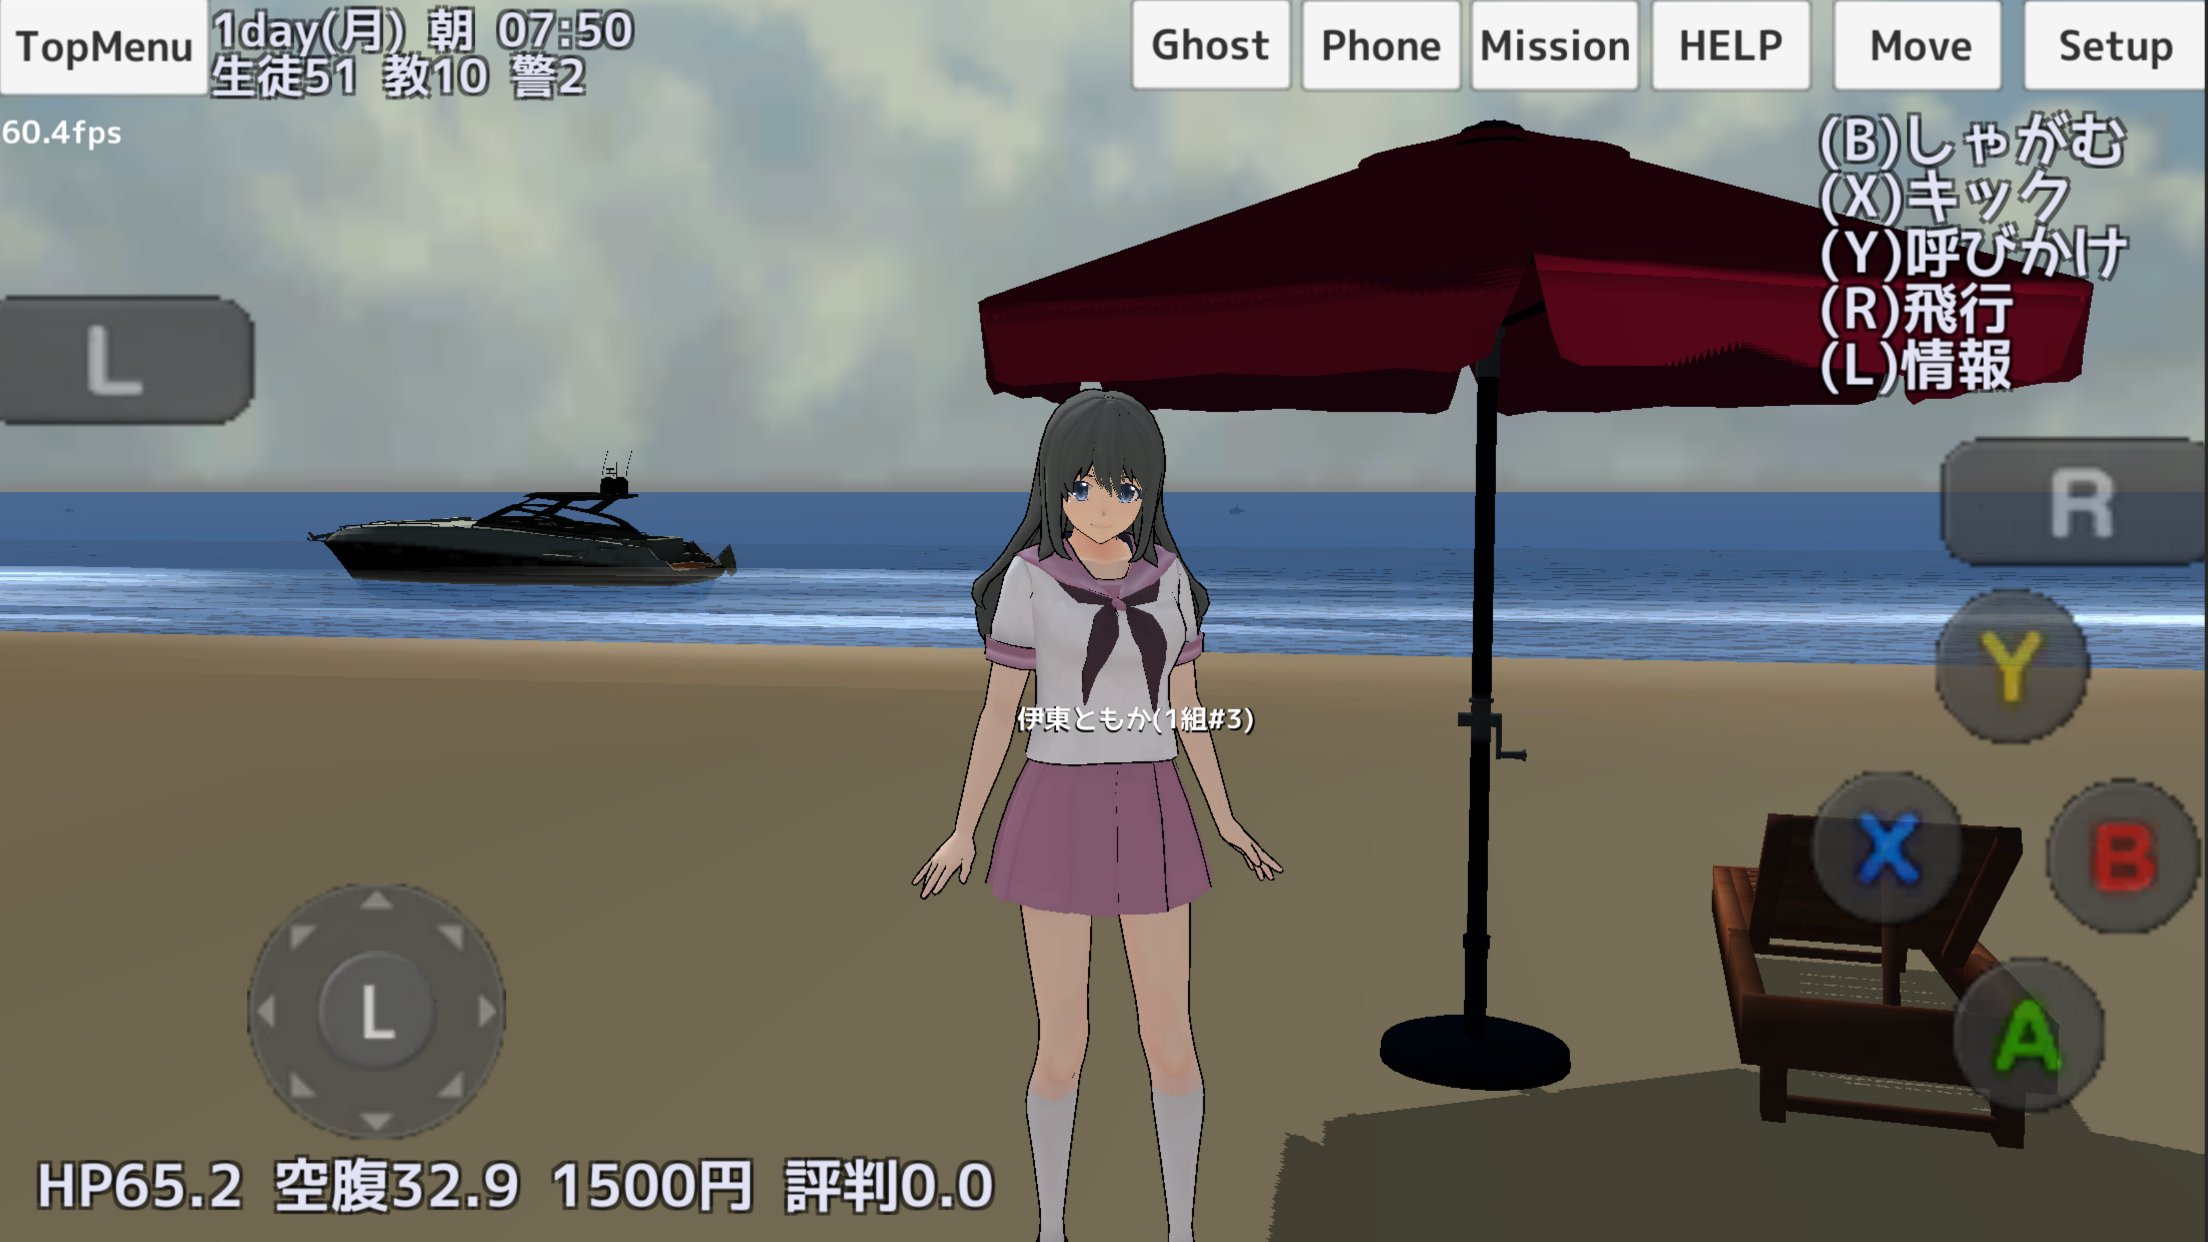 School Girls Simulator for Android - APK Download - 